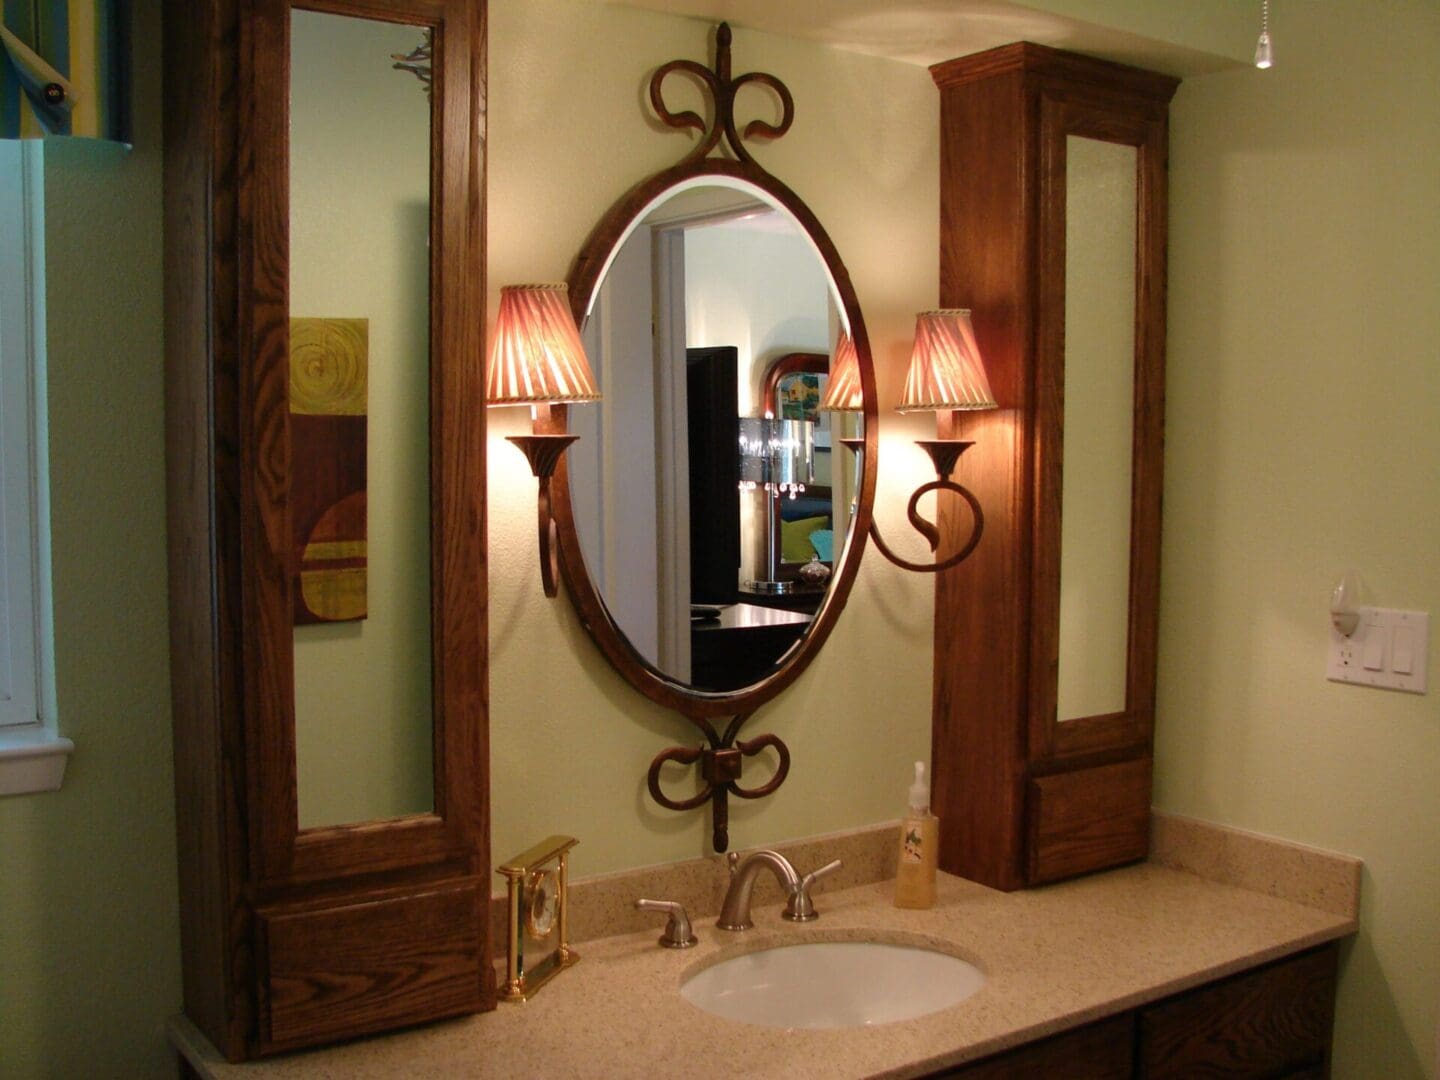 A bathroom with a sink, mirror and lights.